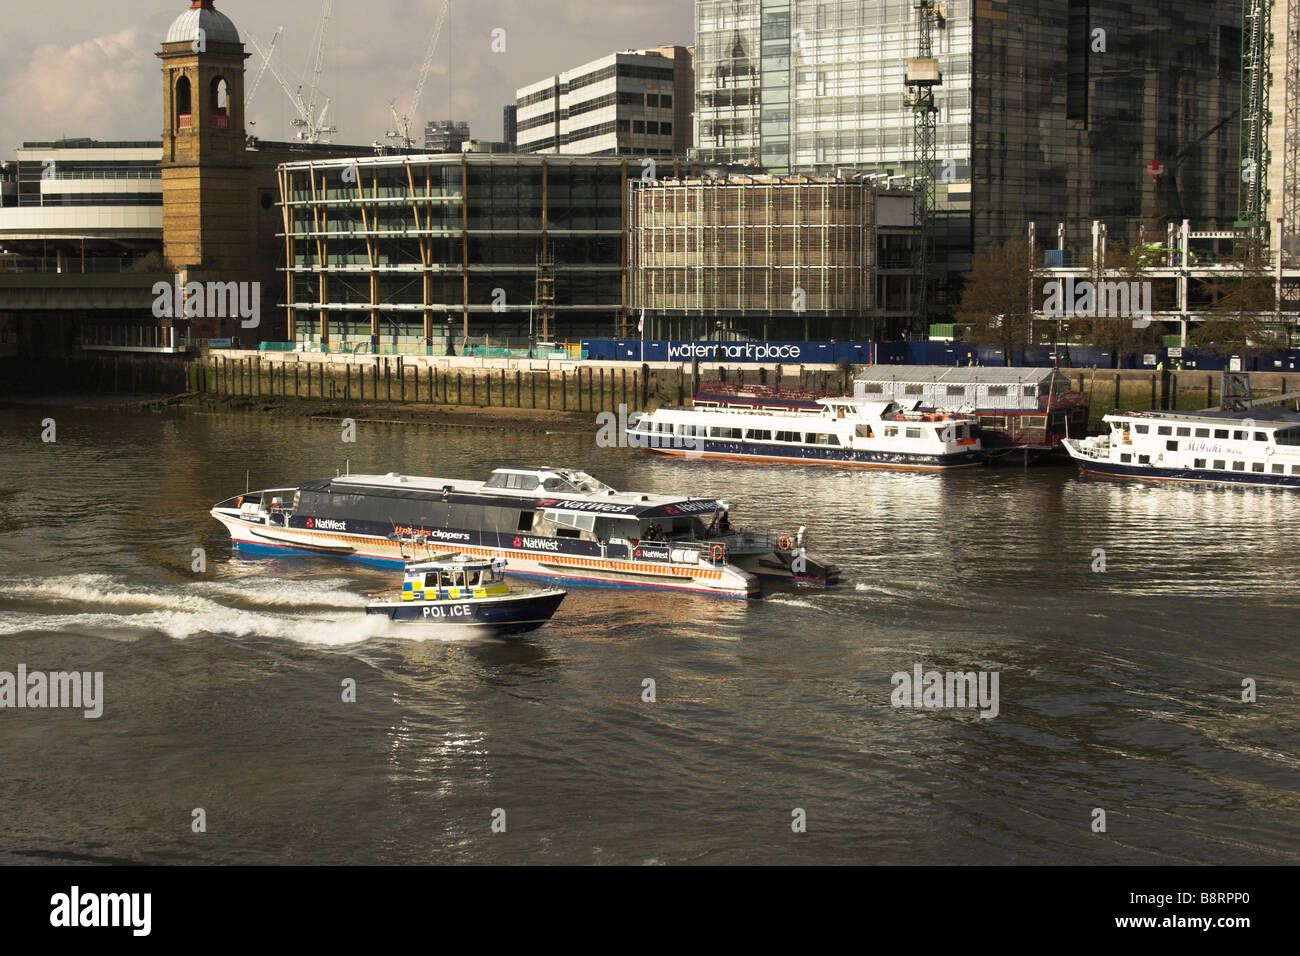 A police launch powers up the River Thames near London Bridge. Stock Photo